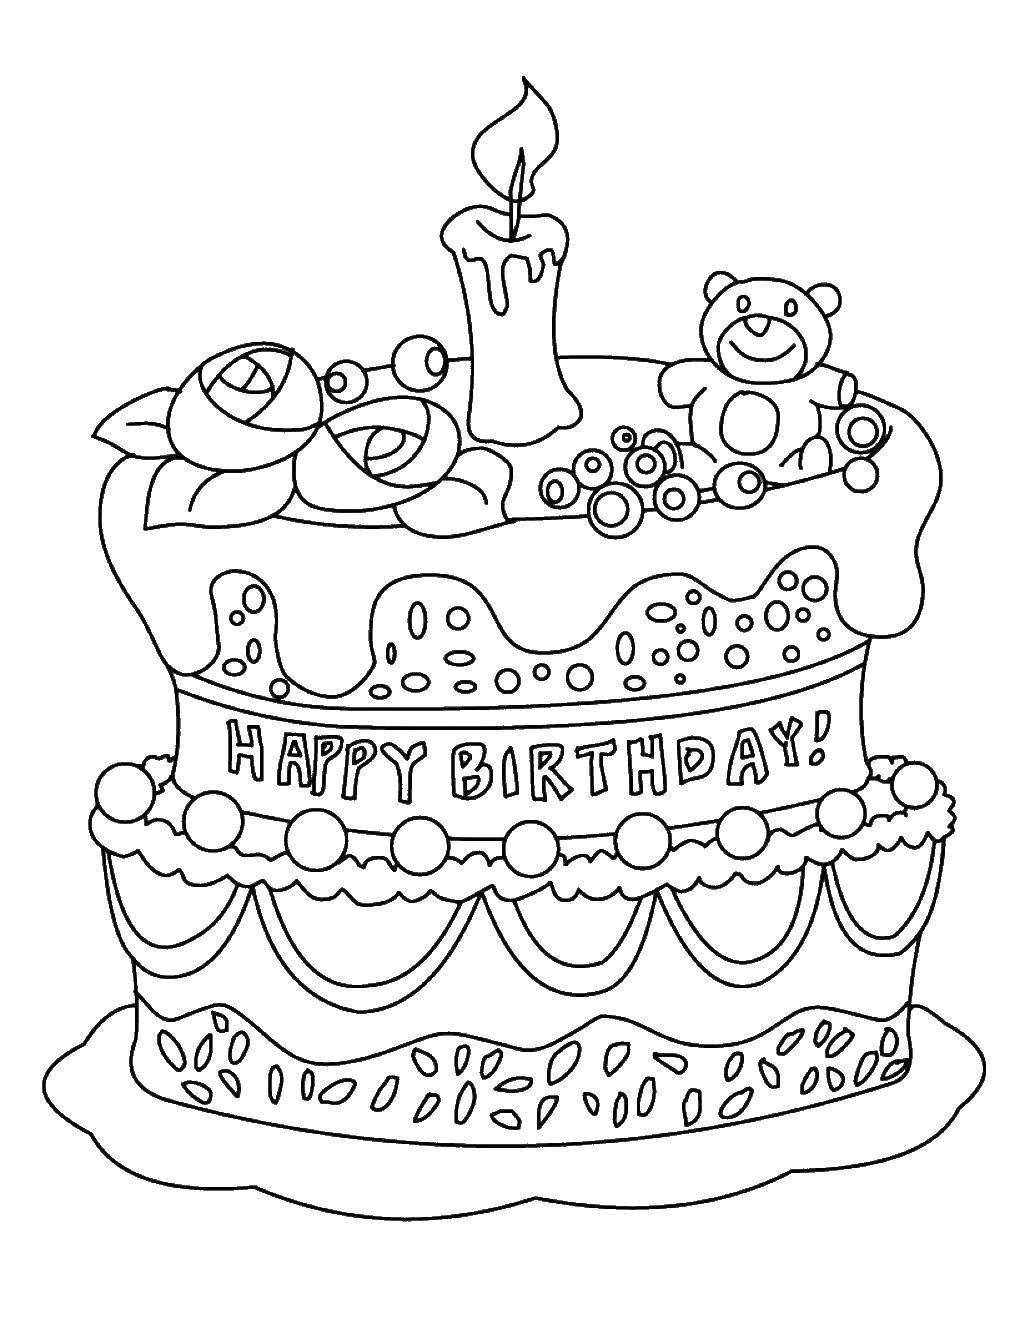 Coloring Cake for birthday. Category cakes. Tags:  Cake, food, holiday.